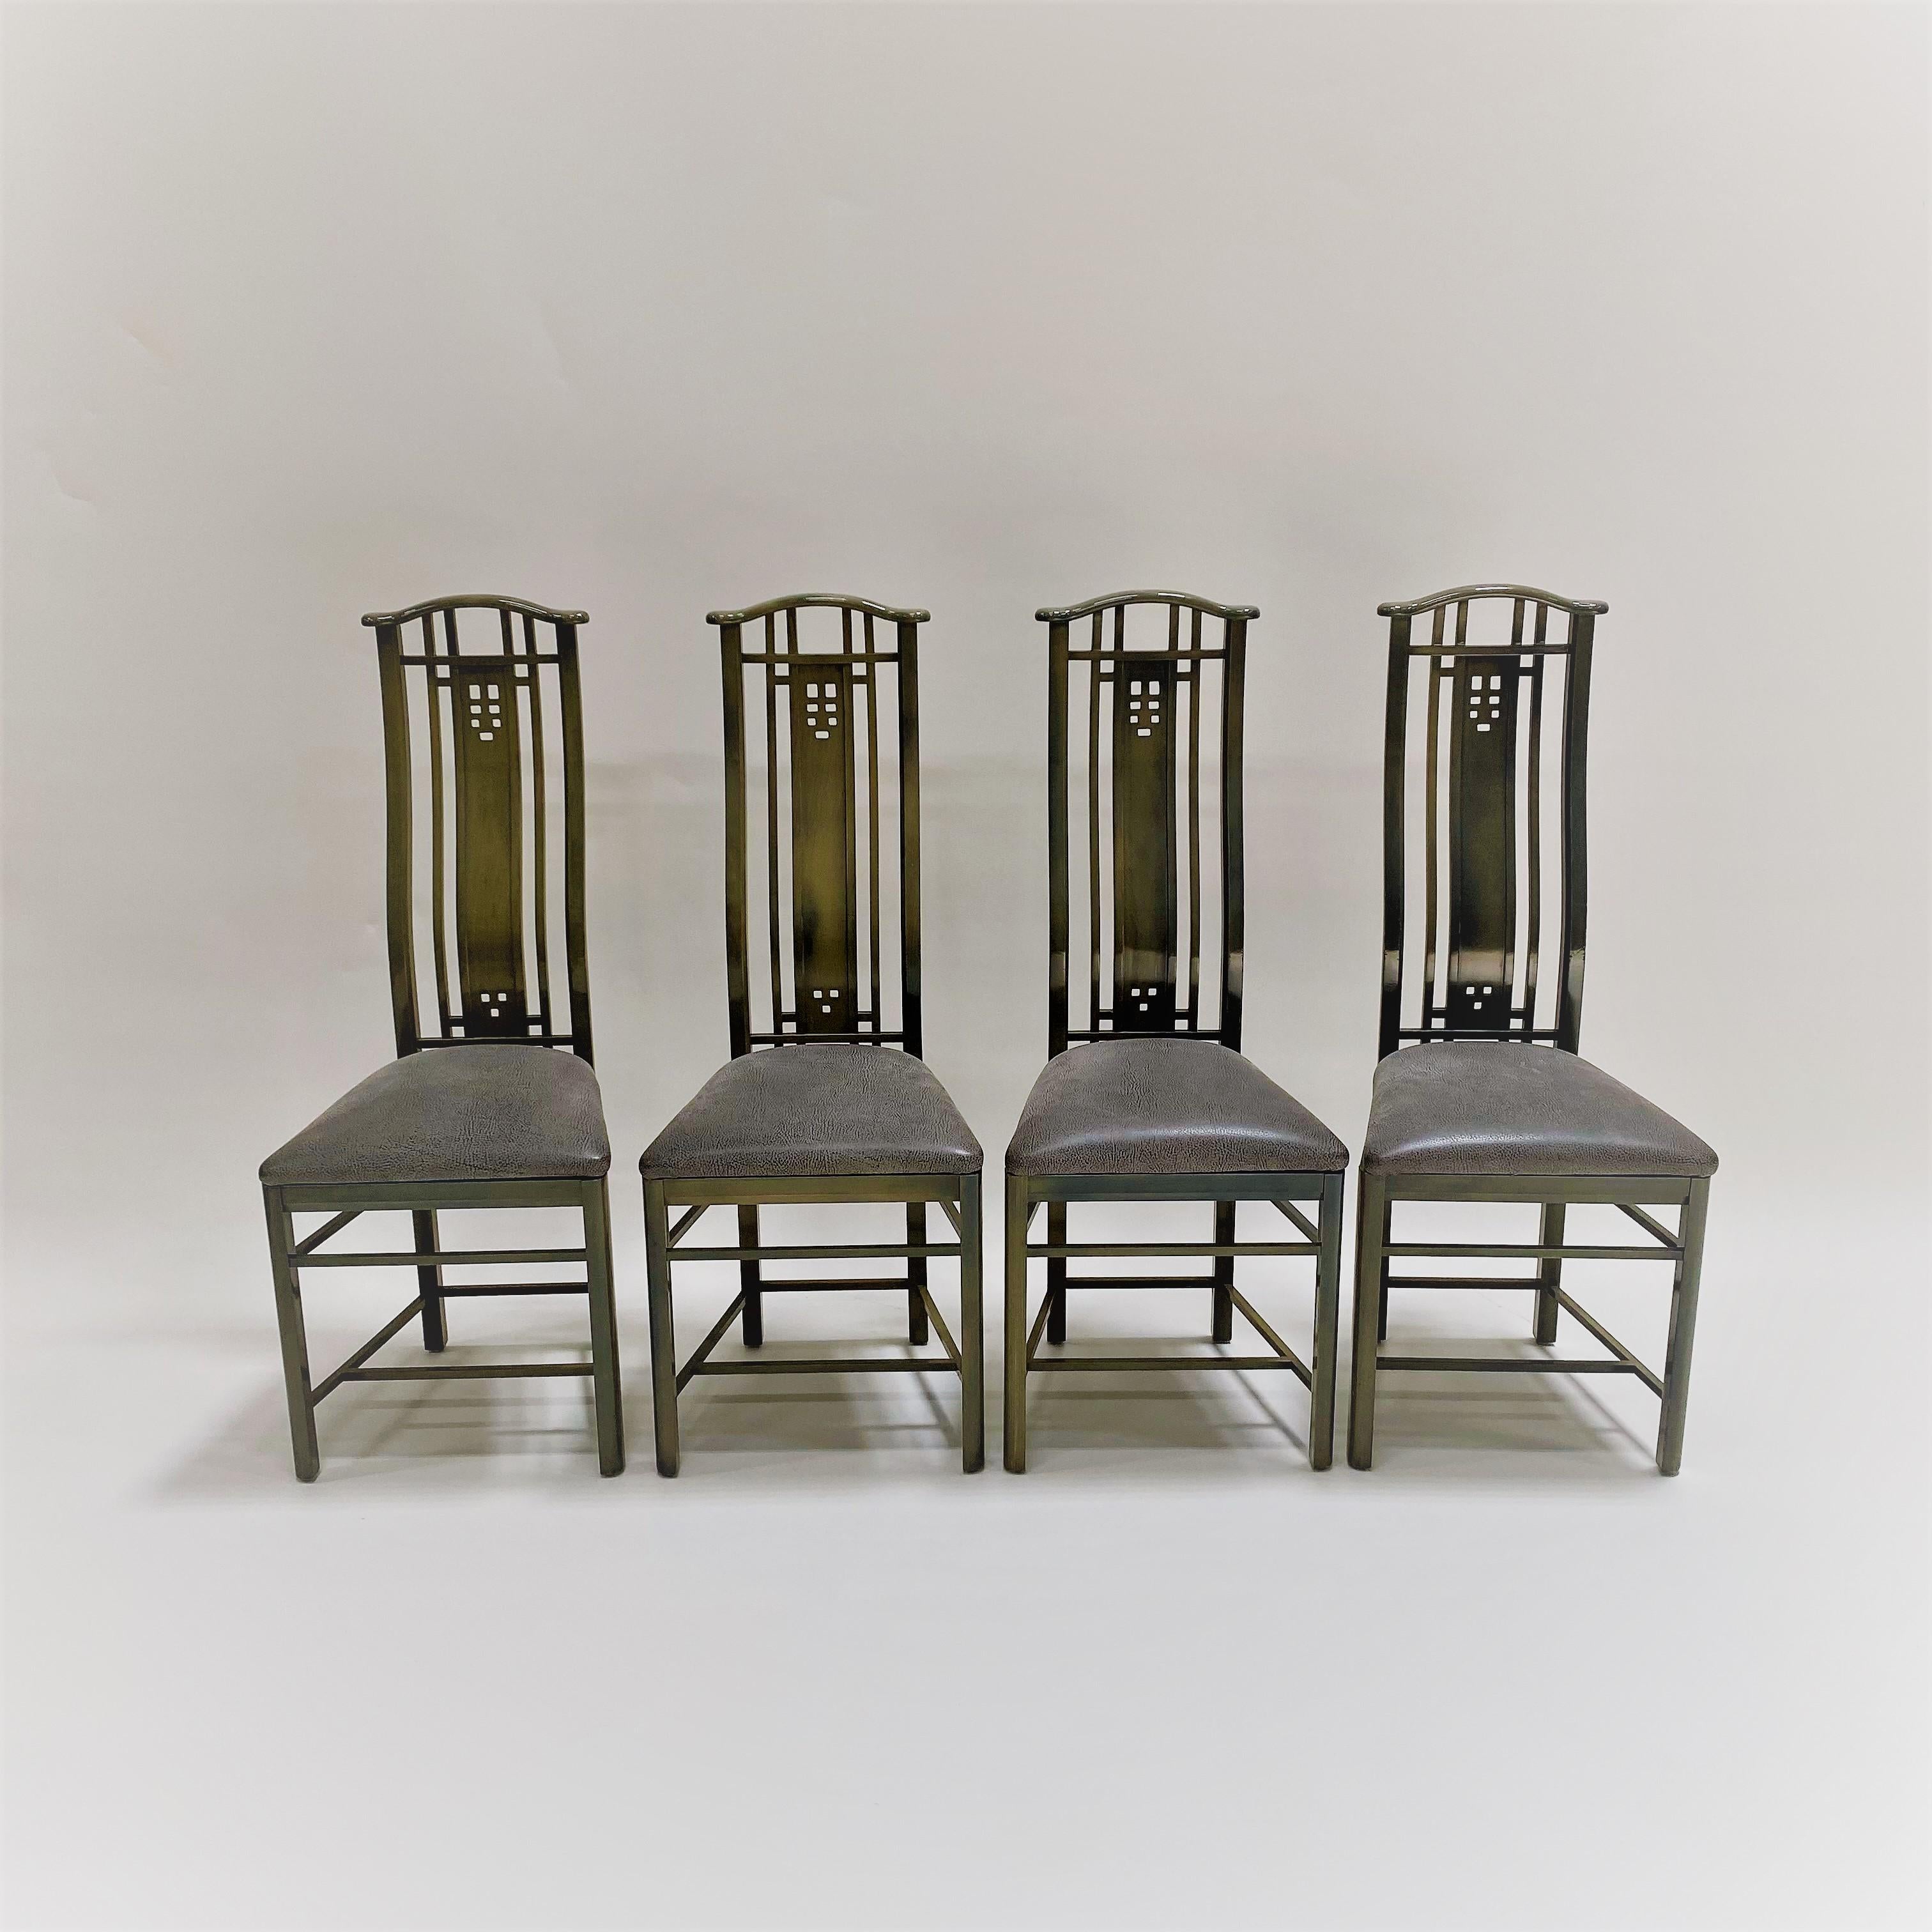 Modern Set of 4 High Back Lacquered Dining Chairs by Umberto Asnago for Giorgetti, 1980 For Sale